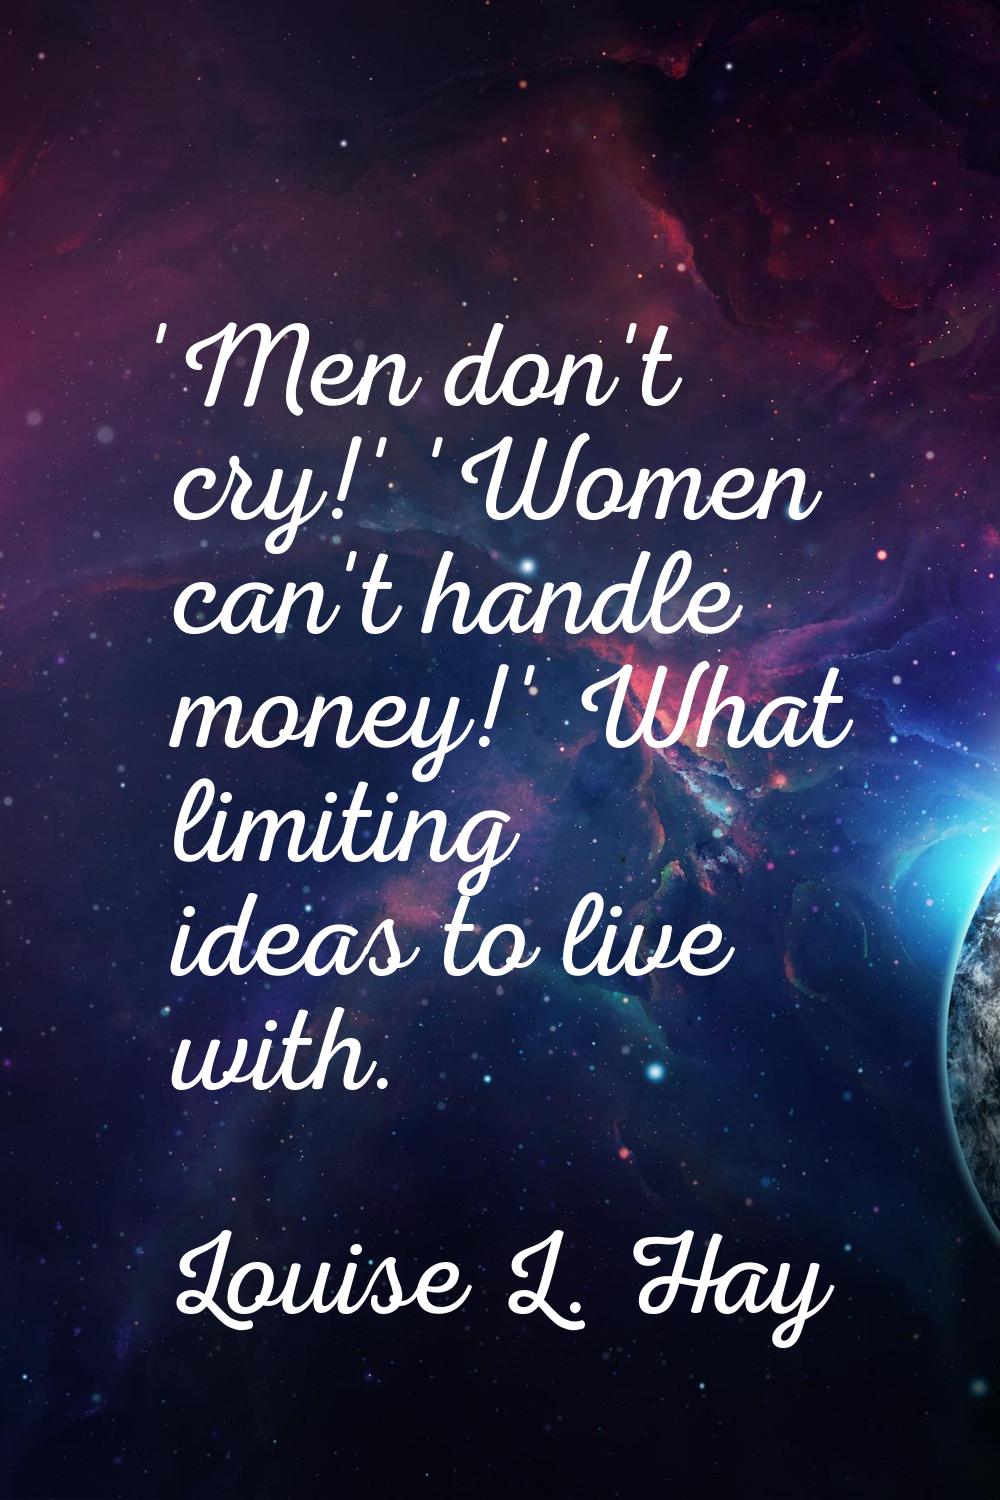 'Men don't cry!' 'Women can't handle money!' What limiting ideas to live with.